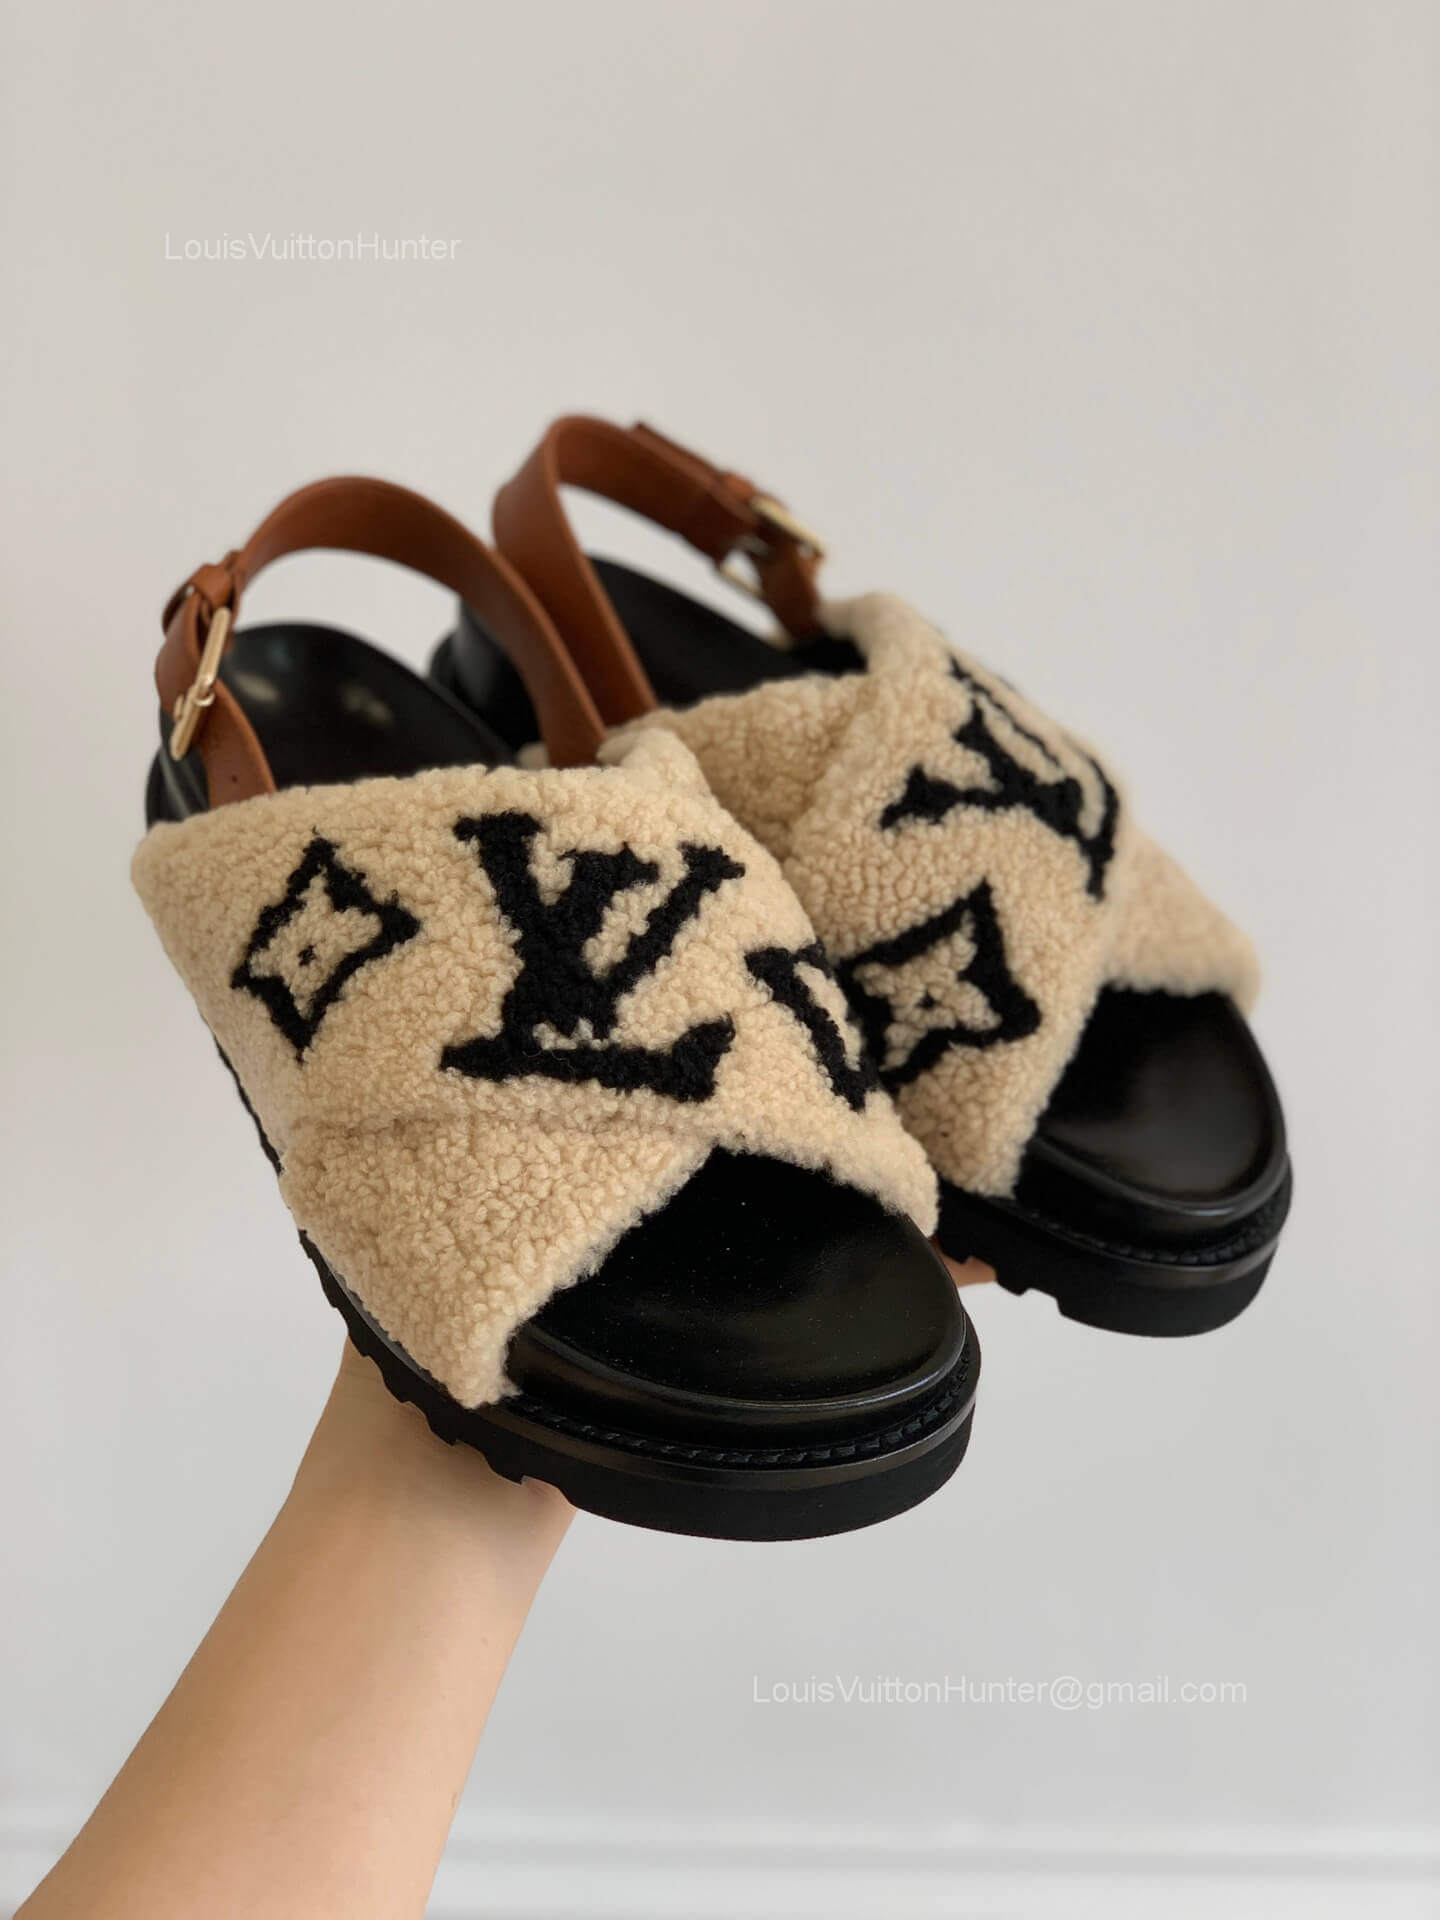 Louis Vuitton Paseo Flat Comfort Sandal in Beige Shearling and Calf Leather with Monogram Flower 2281825